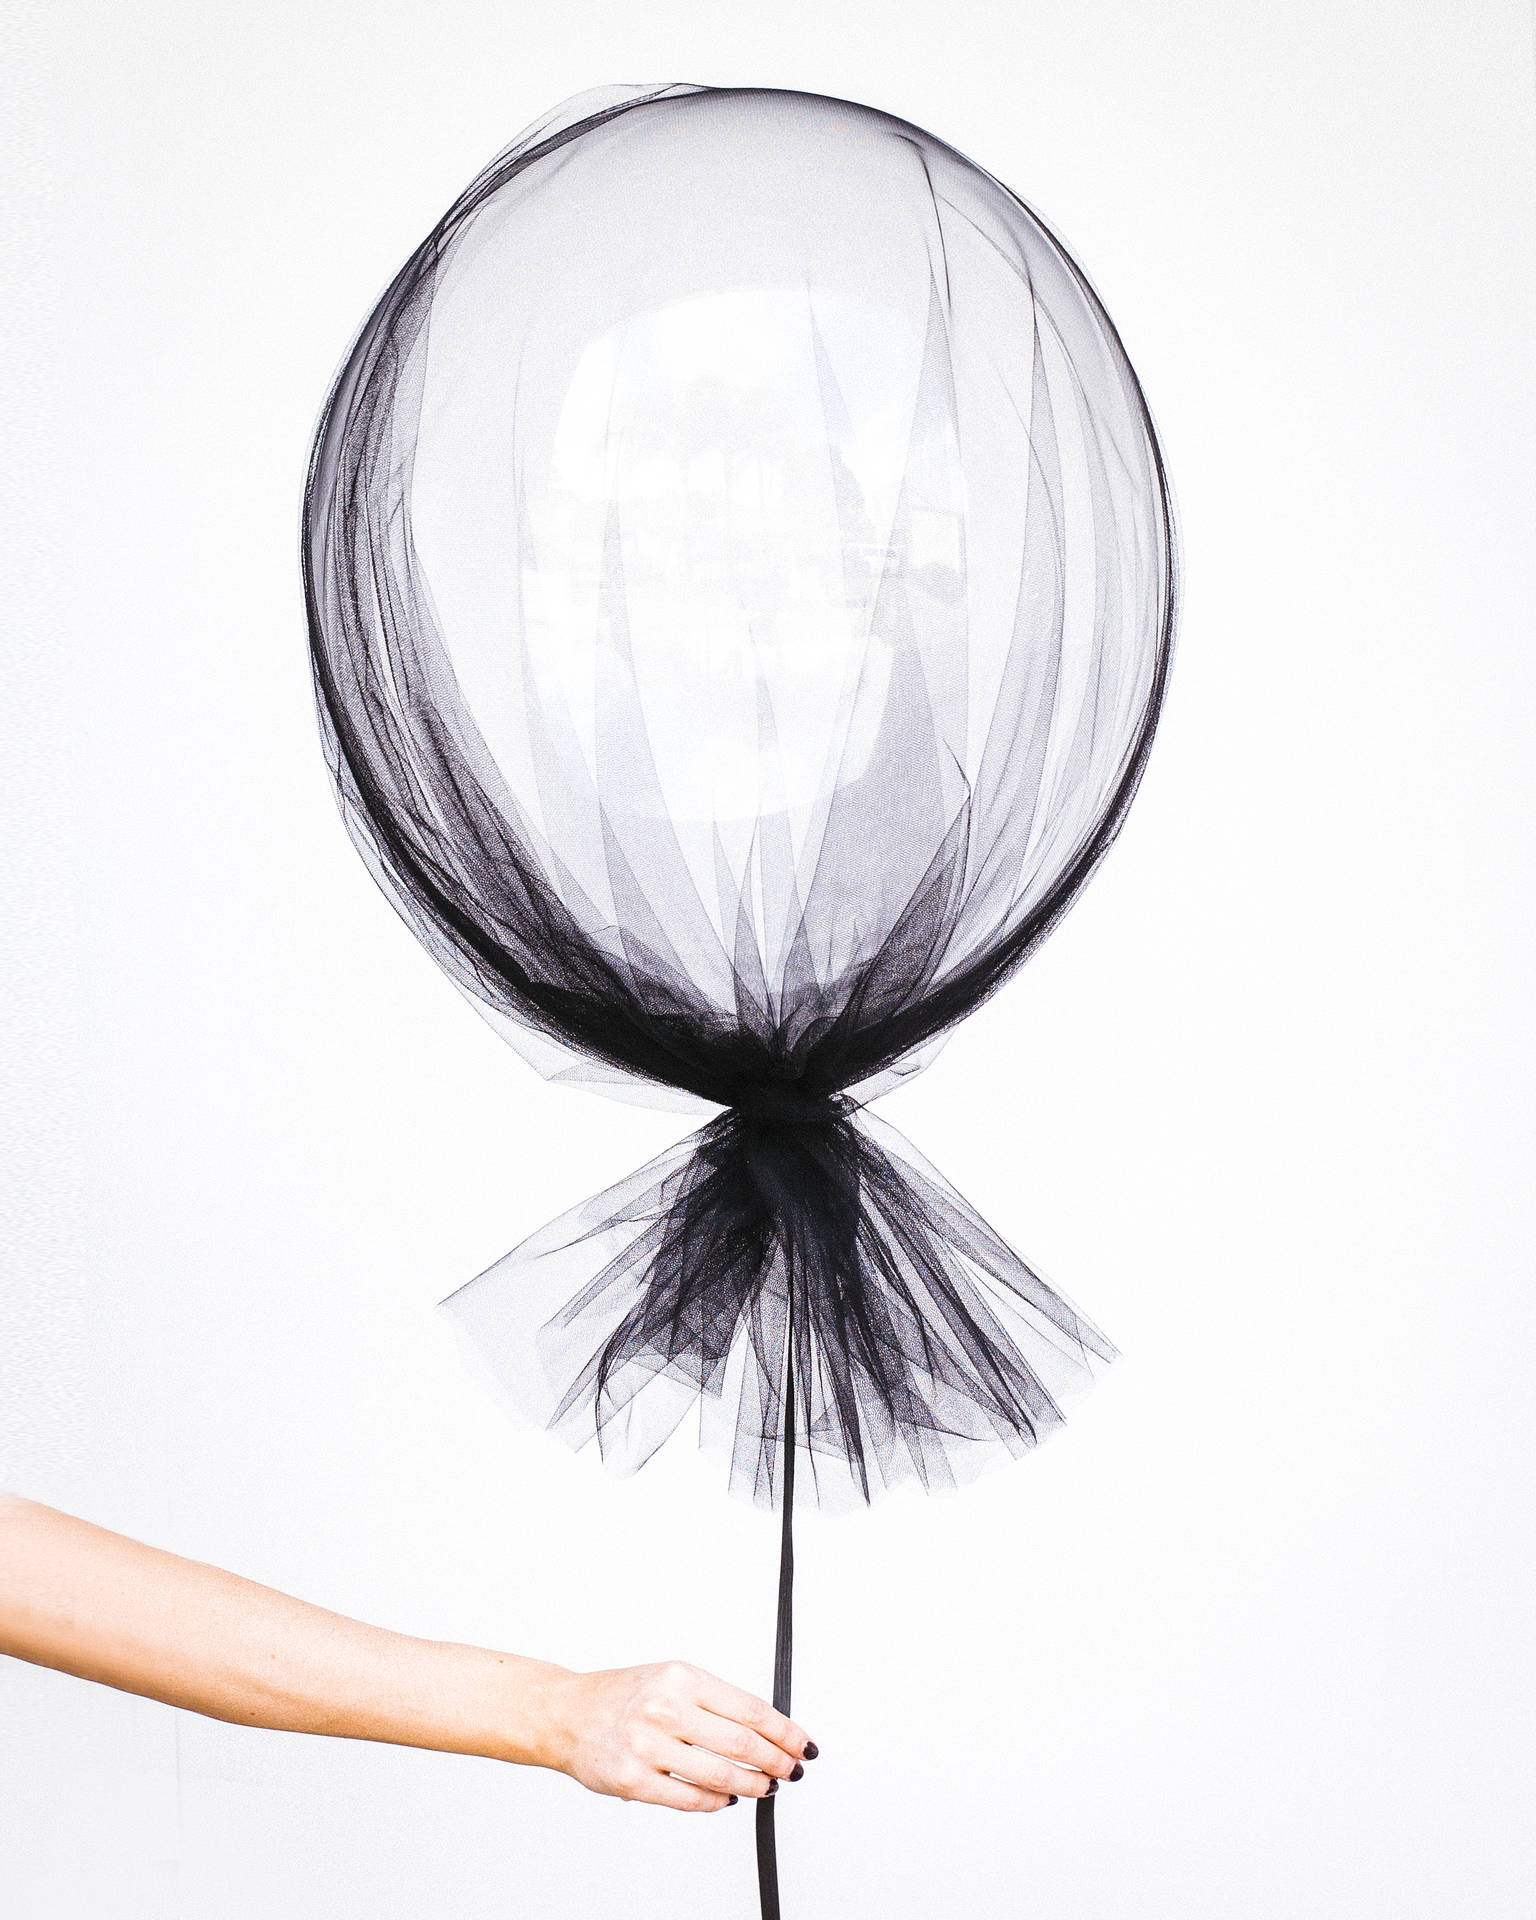 Wedding Balloon In Tulle Fabric Background